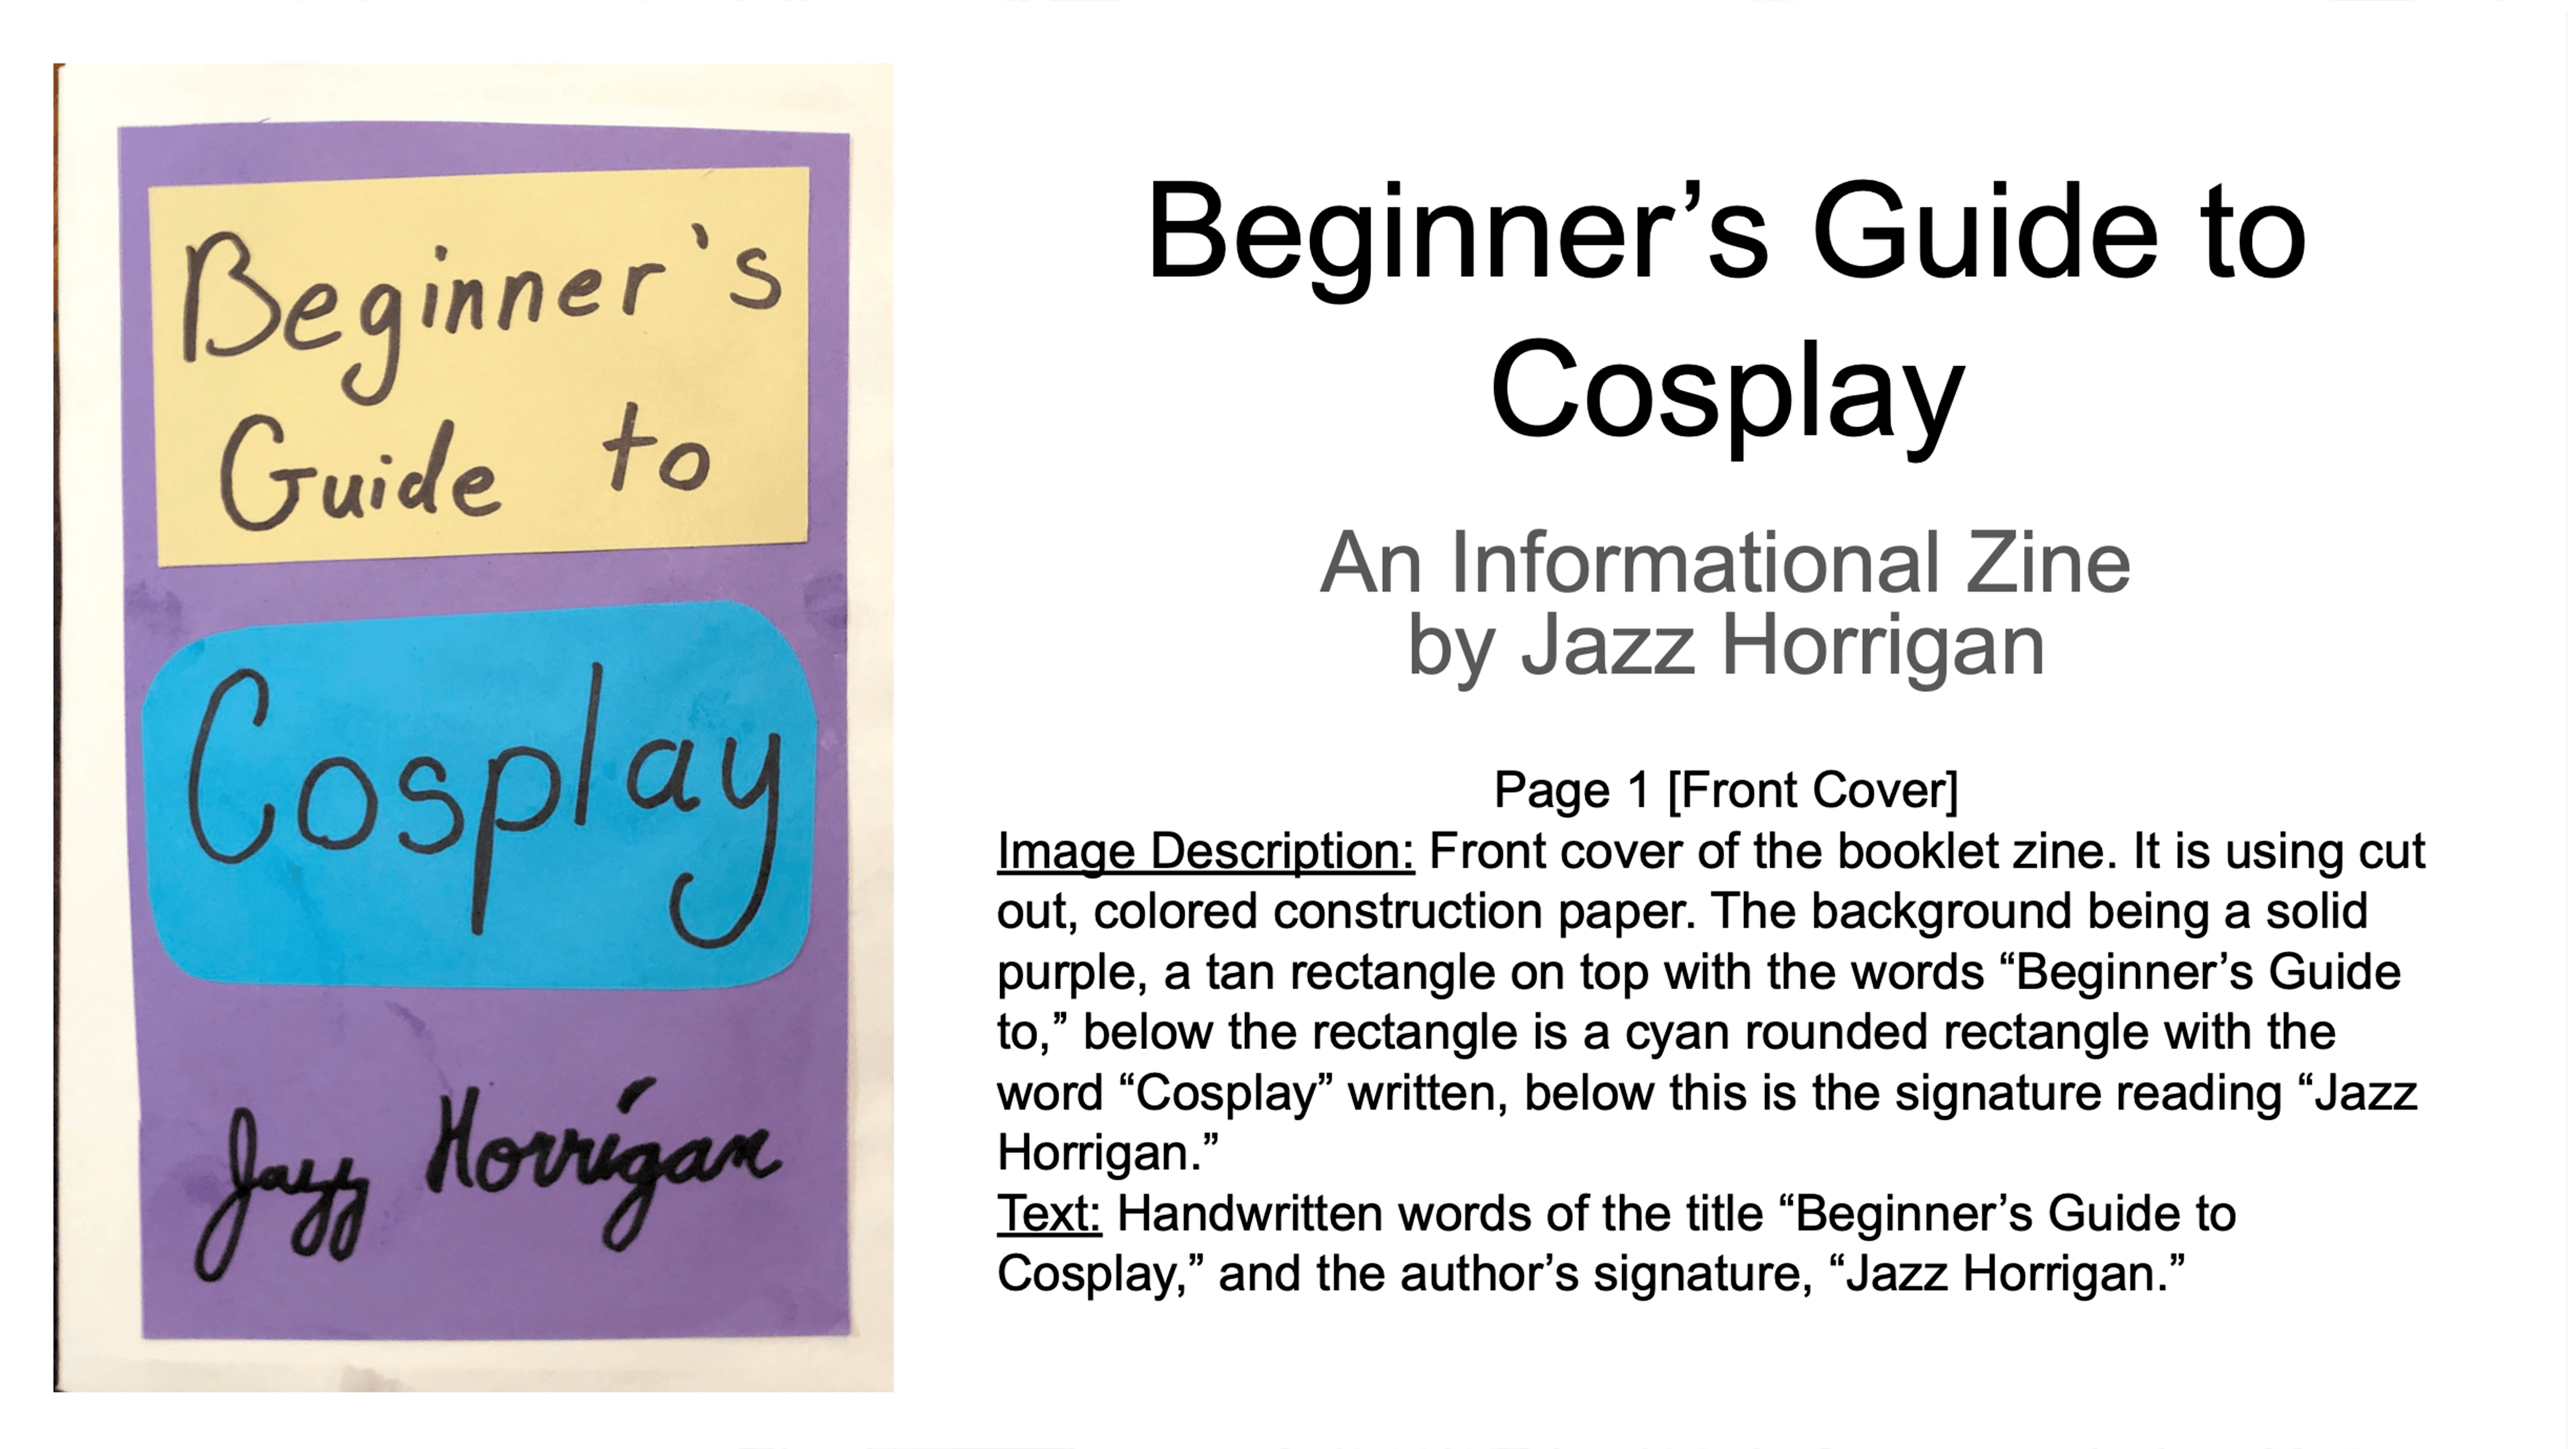 First page of Jazz's zine, titled "beginner's guide to cosplay"